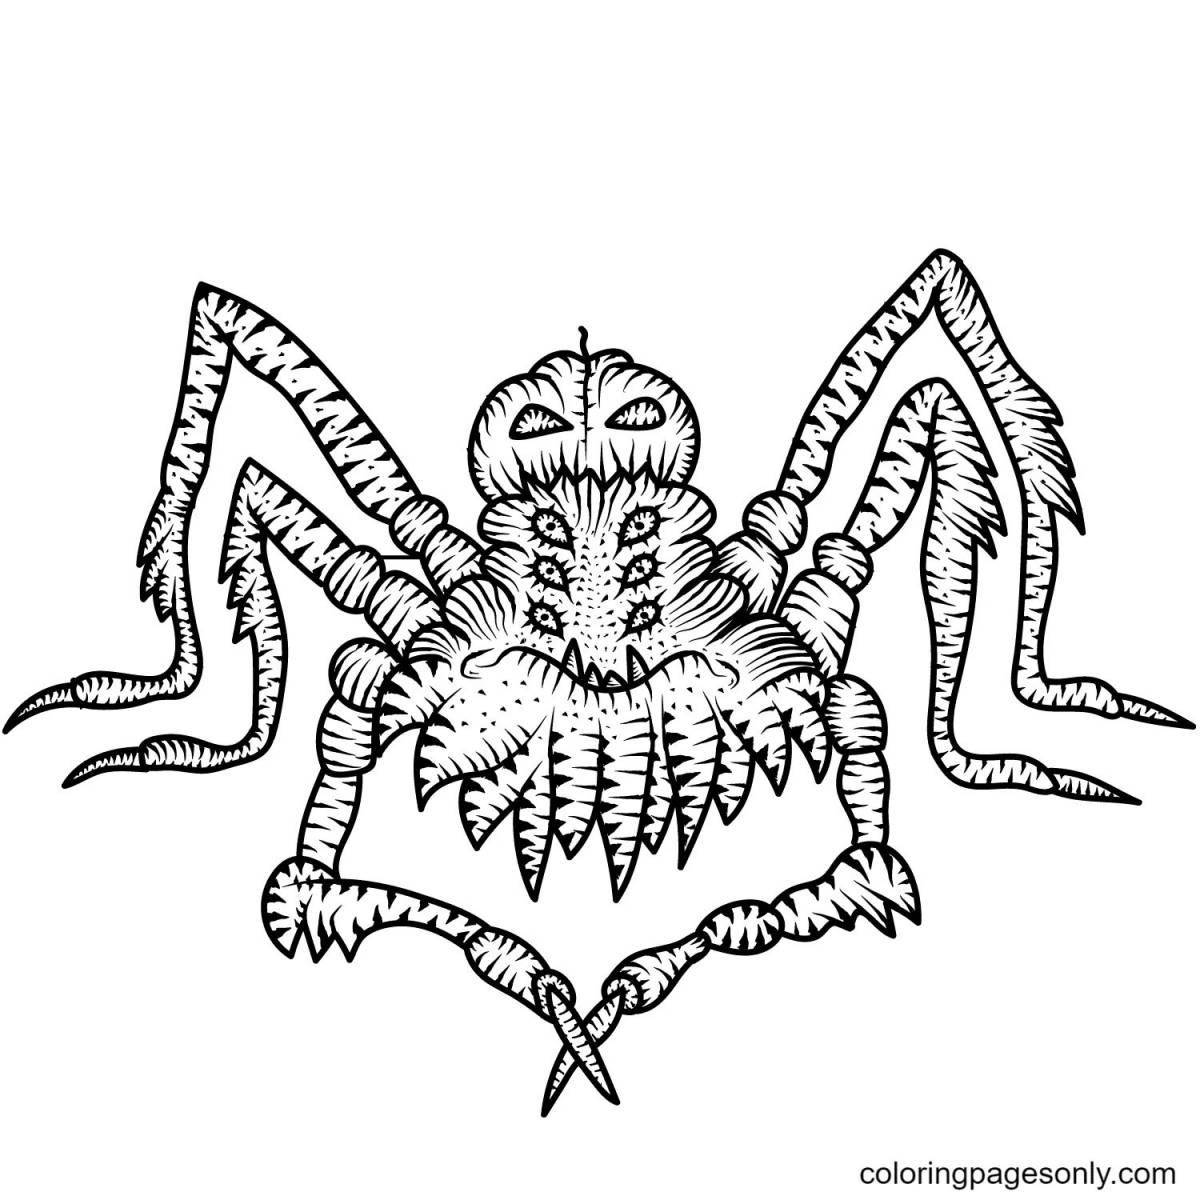 Coloring page nasty spider